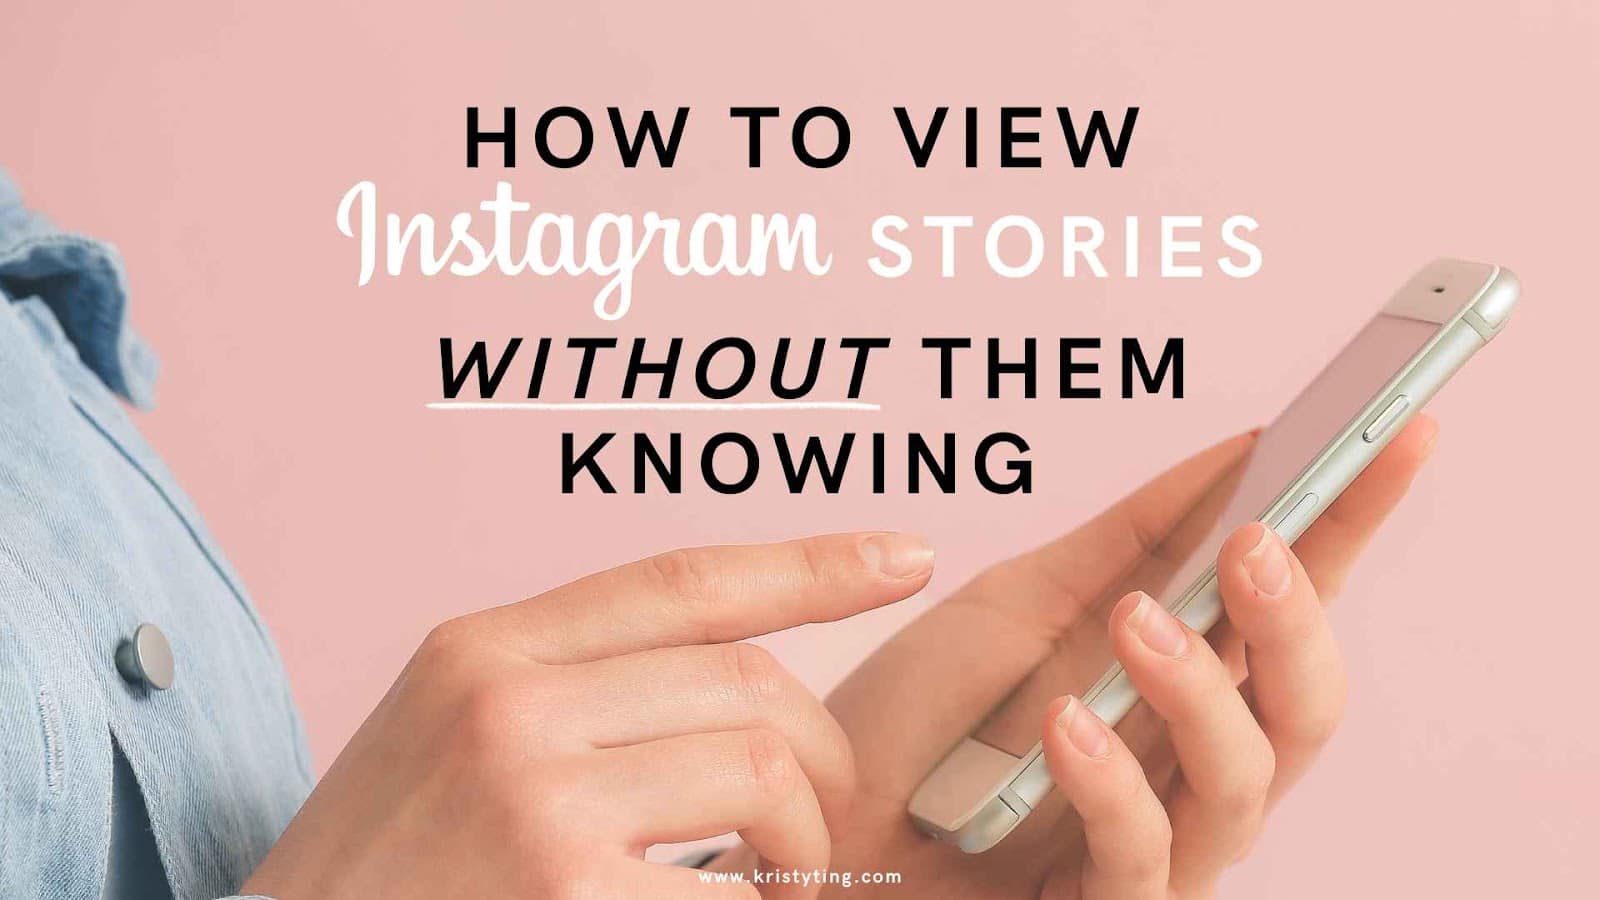 How to read Instagram stories without them knowing' is written over a picture of a hand holding a smartphone on a pink background.